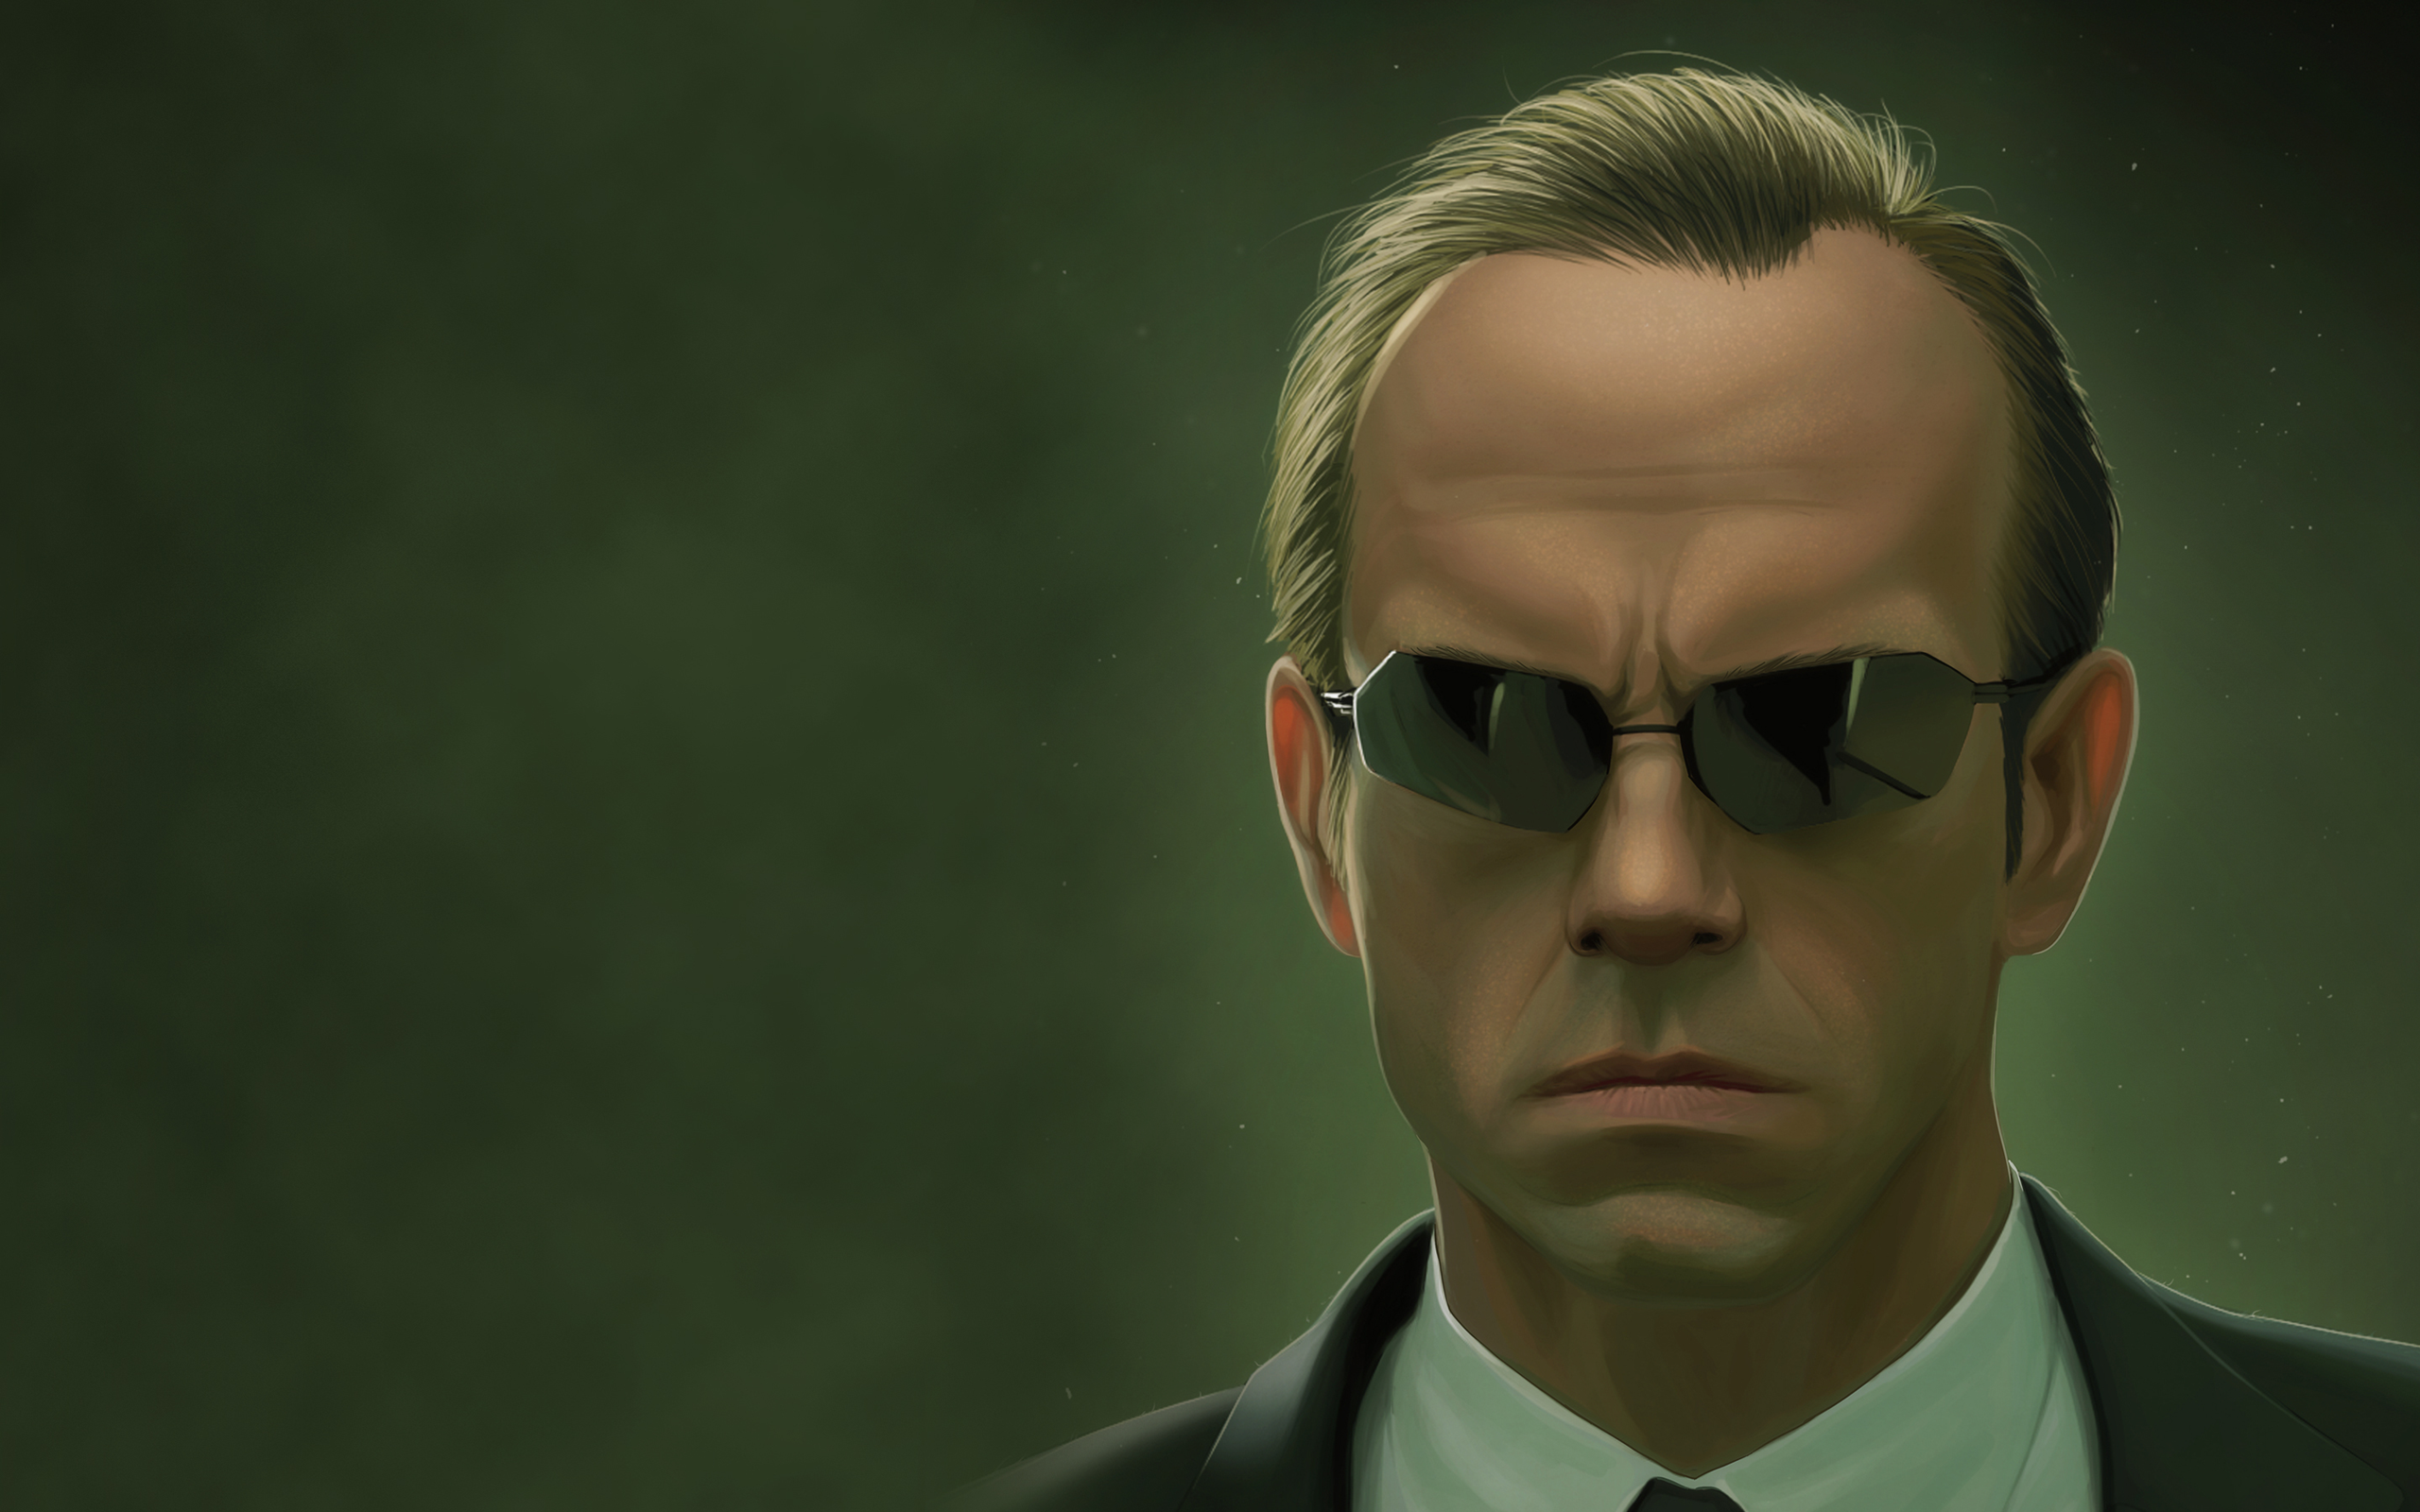 The Matrix, #Agent Smith, #sunglasses, #Hugo Weaving, #simple background, #green background, #movies, #artwork, #sui. Agent smith, The matrix movie, Hugo weaving